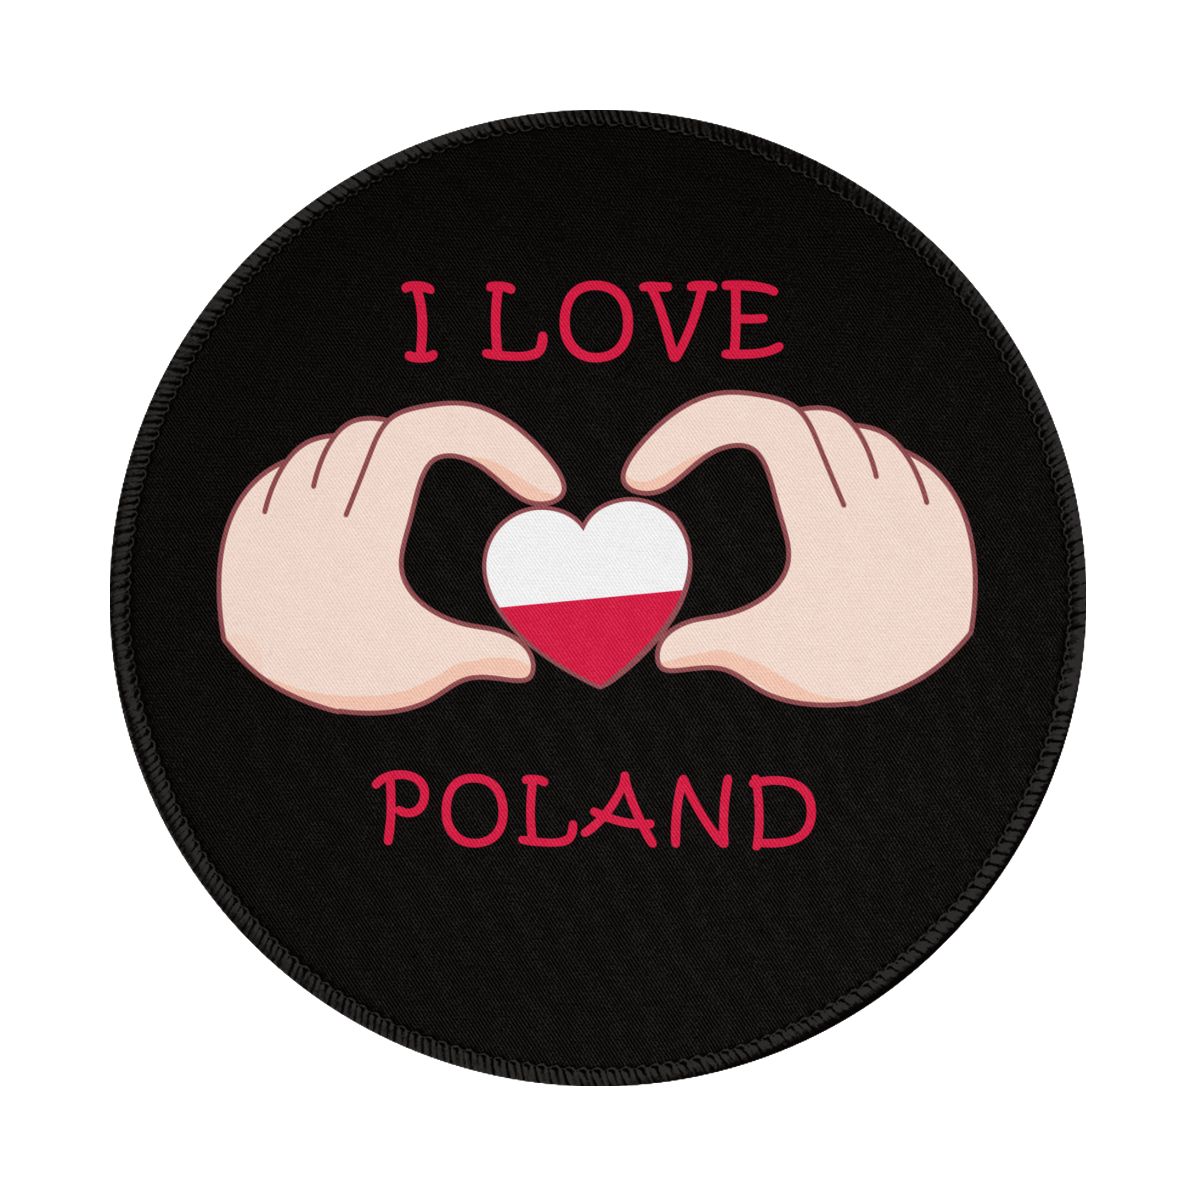 I Love Poland Waterproof Round Mouse Pad for Wireless Mouse